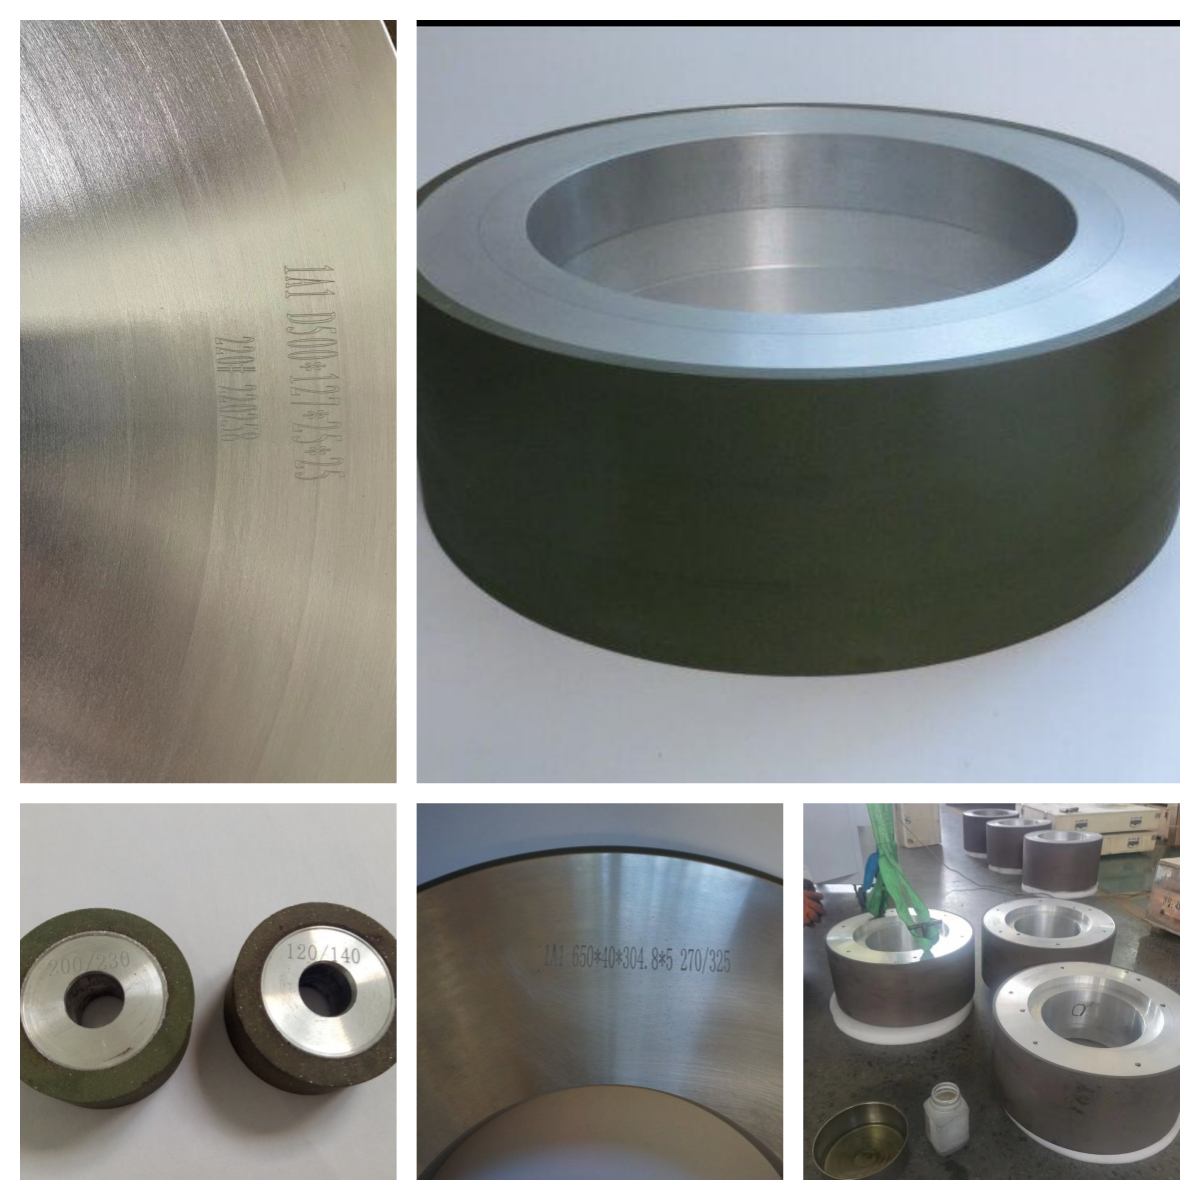 Grinding wheels for oil and gas industry